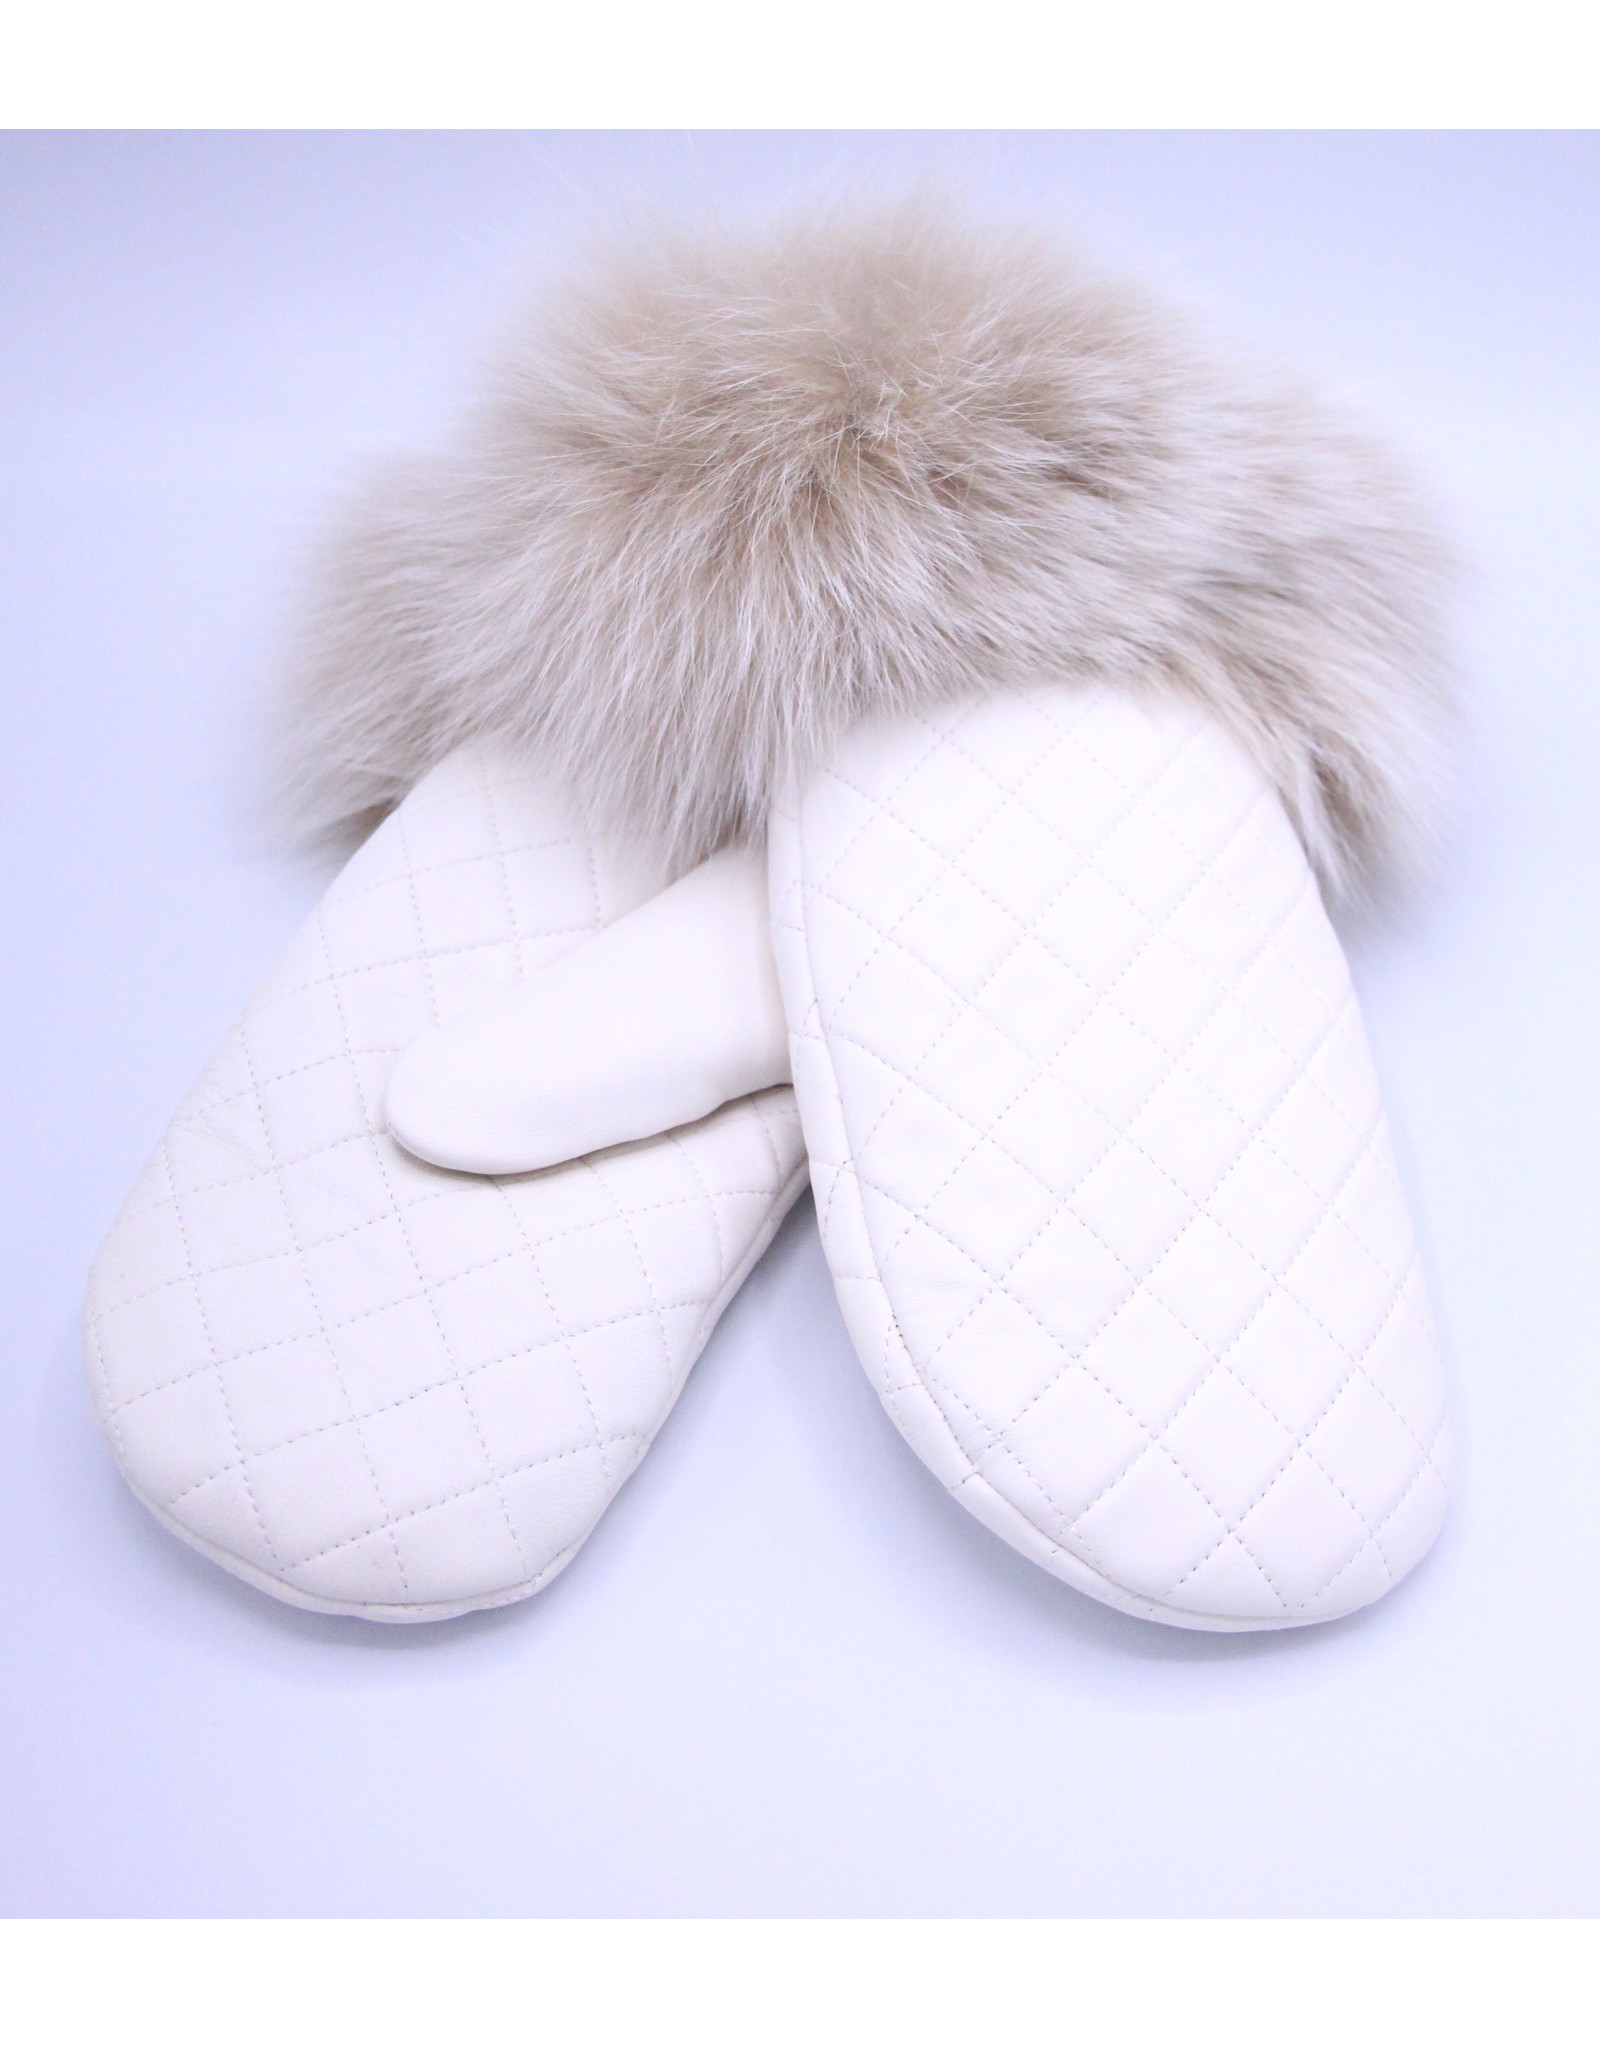 Quilted Leather Mitt with Fox Trim White/Blush - M/L